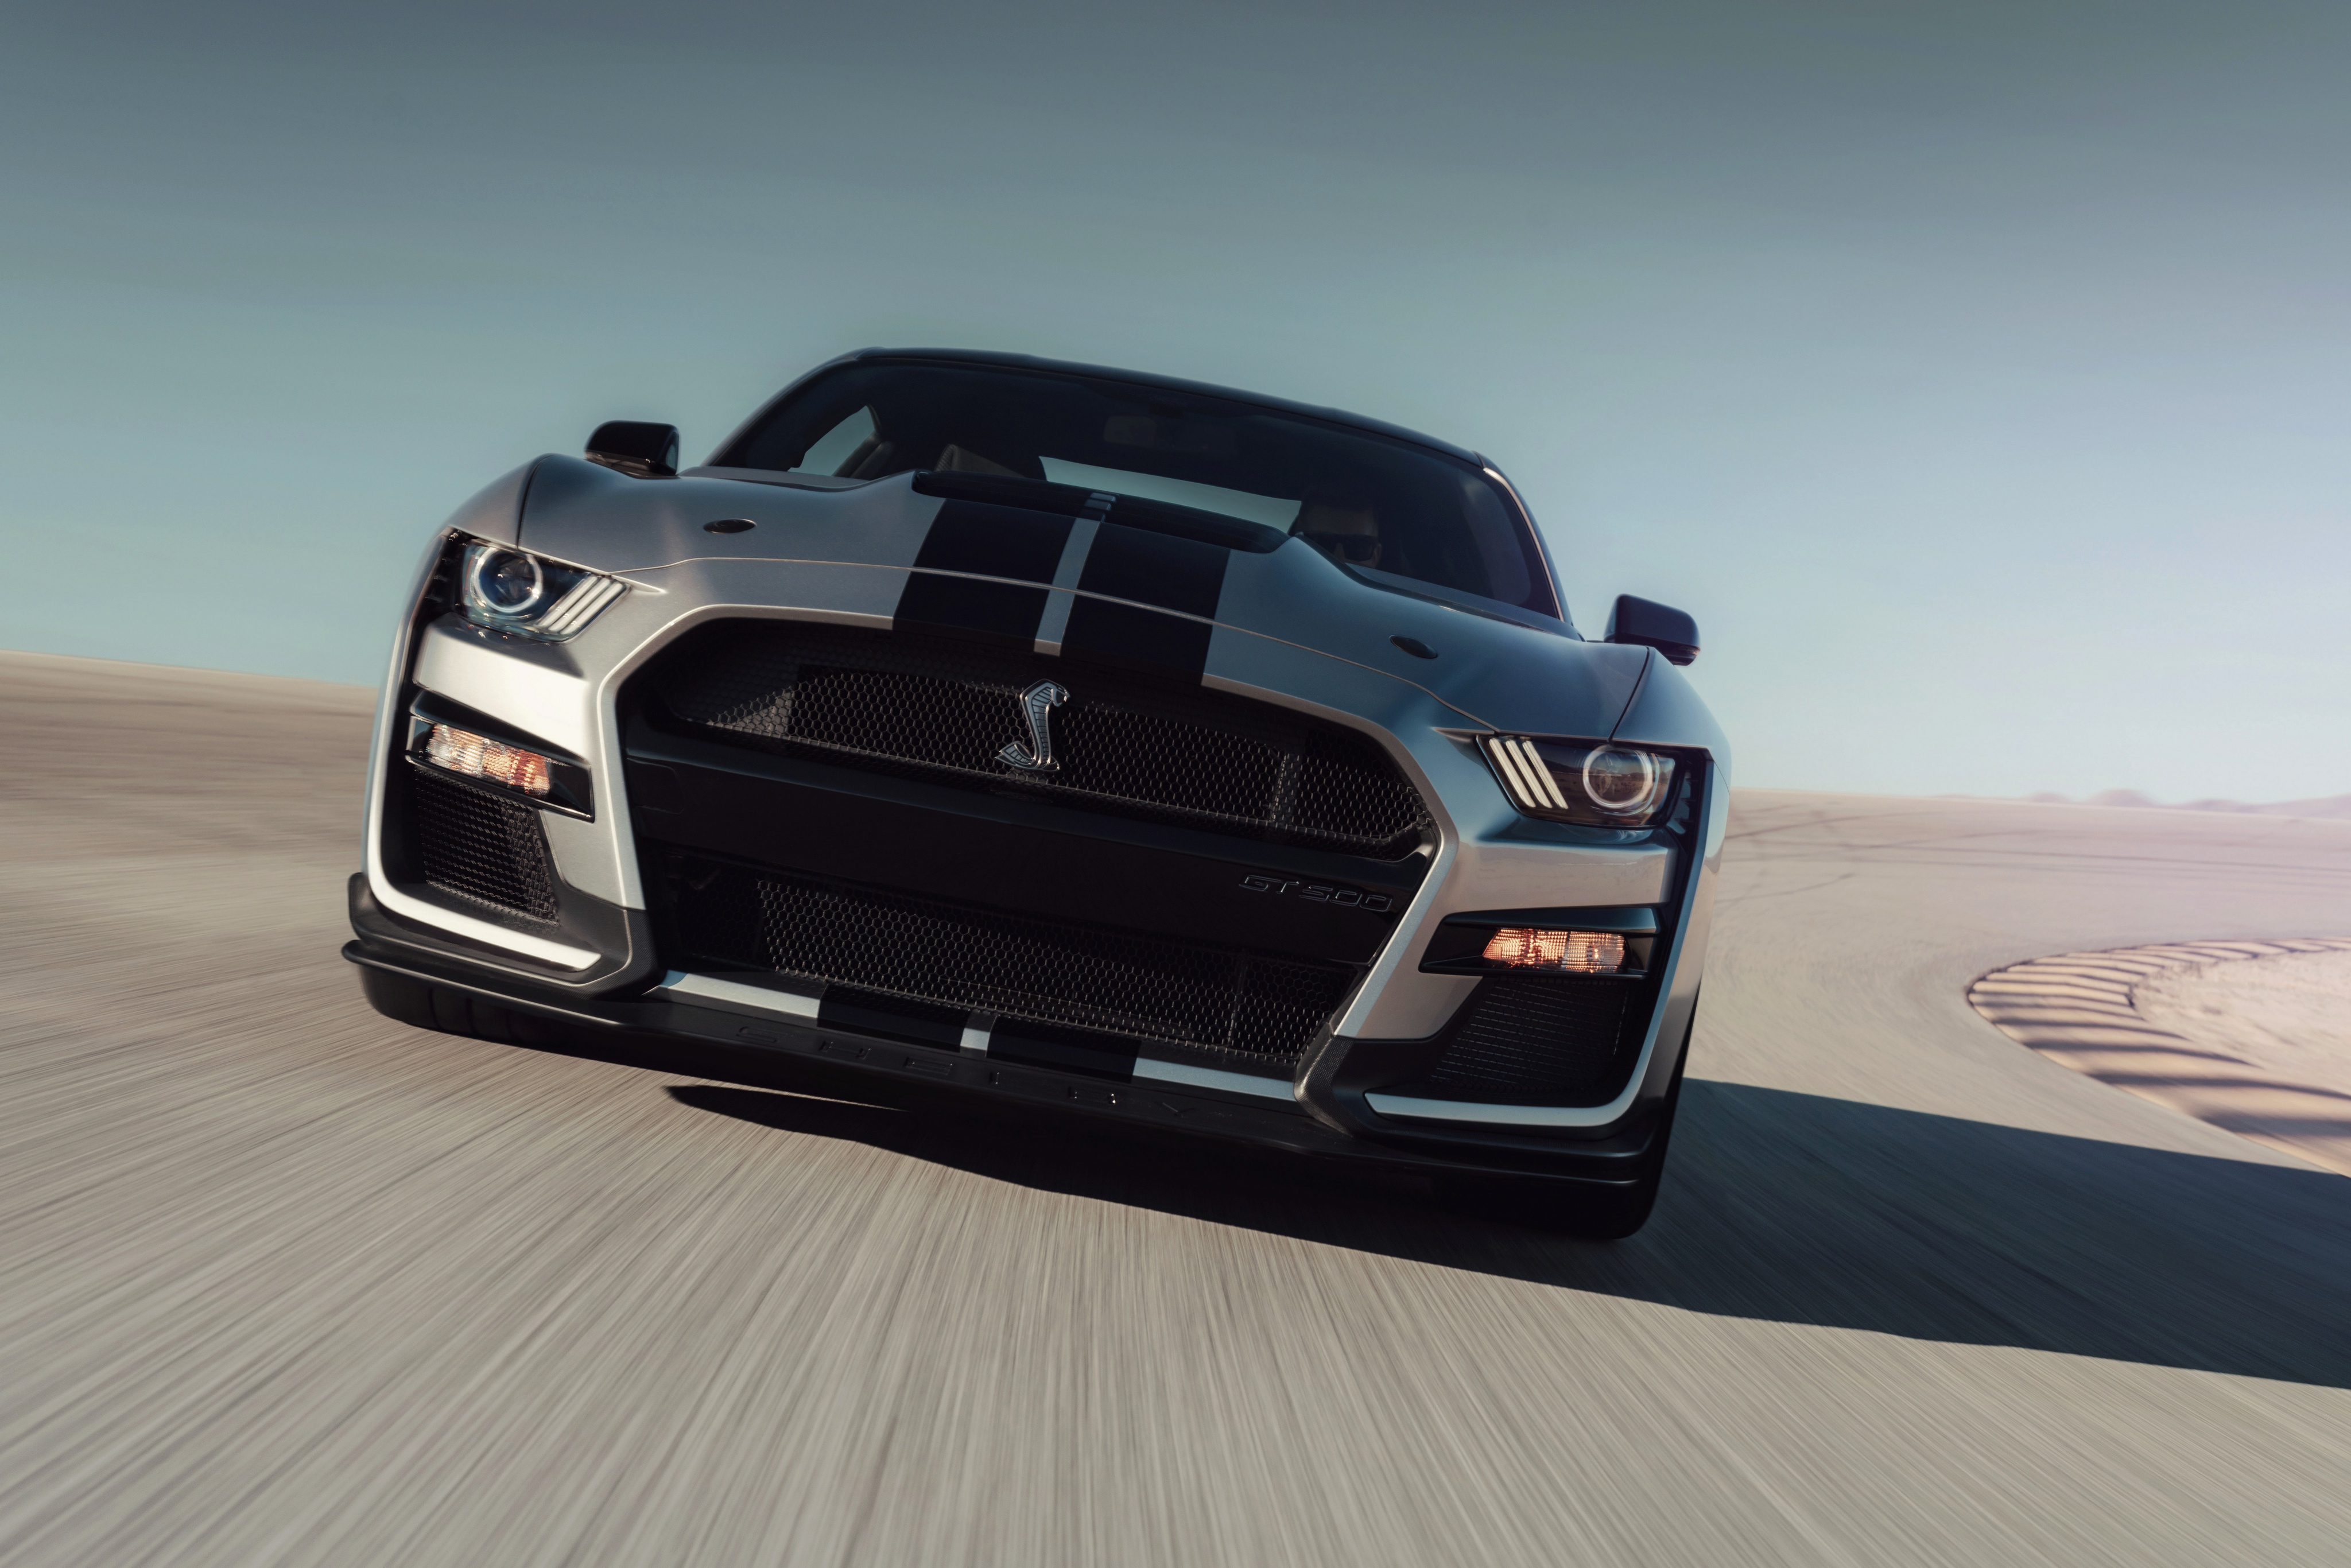 Handy-Wallpaper Ford, Ford Mustang, Muscle Car, Ford Mustang Shelby Gt500, Fahrzeuge, Silbernes Auto, Ford Mustang Shelby kostenlos herunterladen.